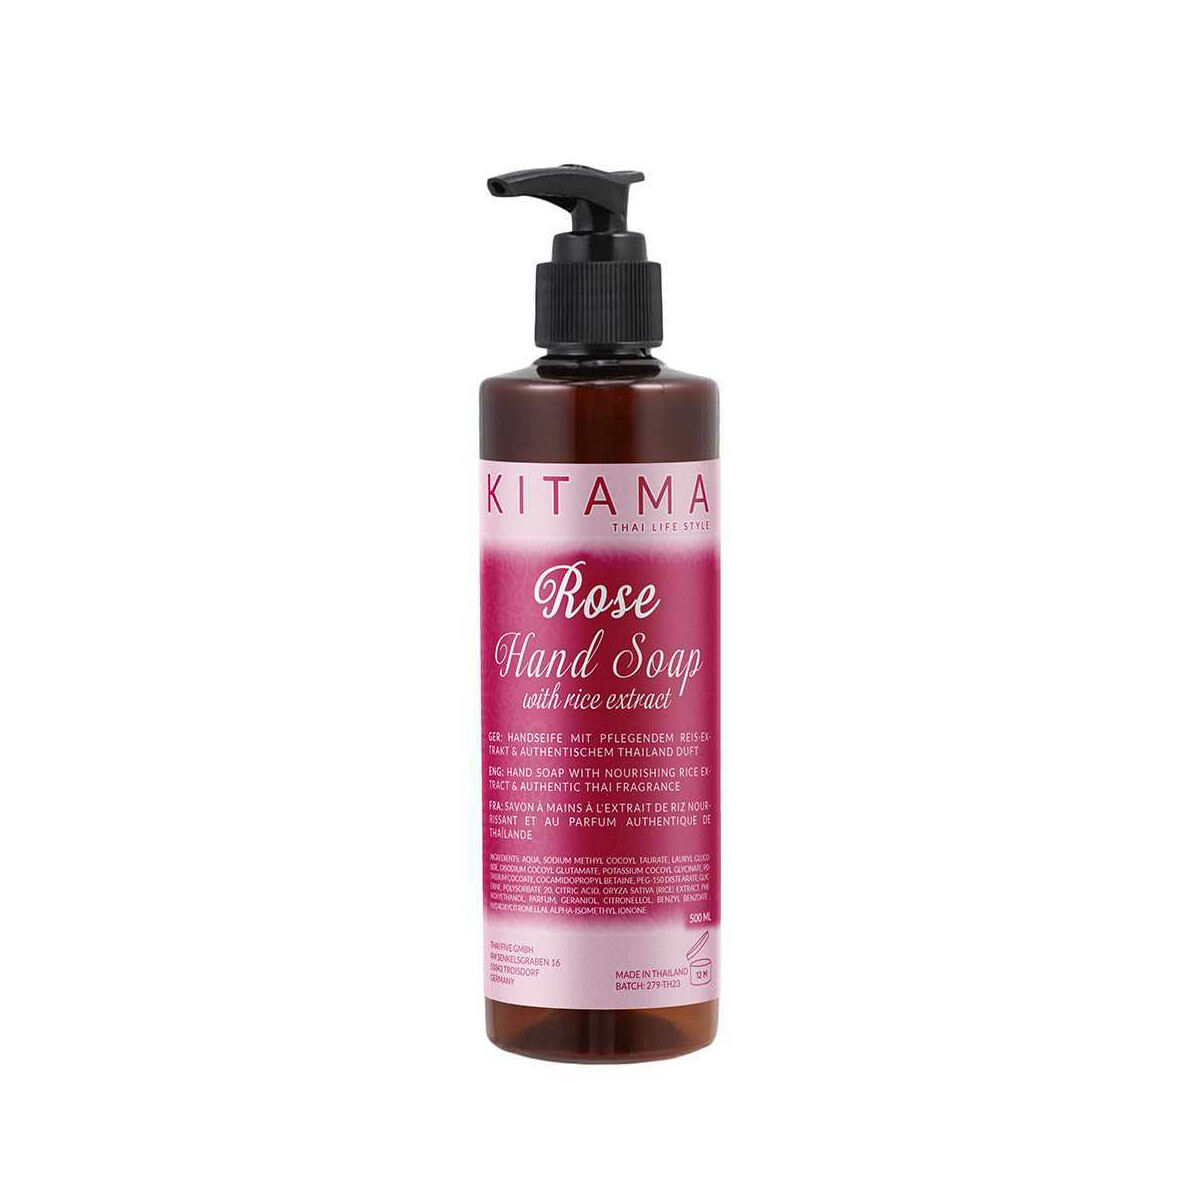 Thai Liquid soap rose with rice extract